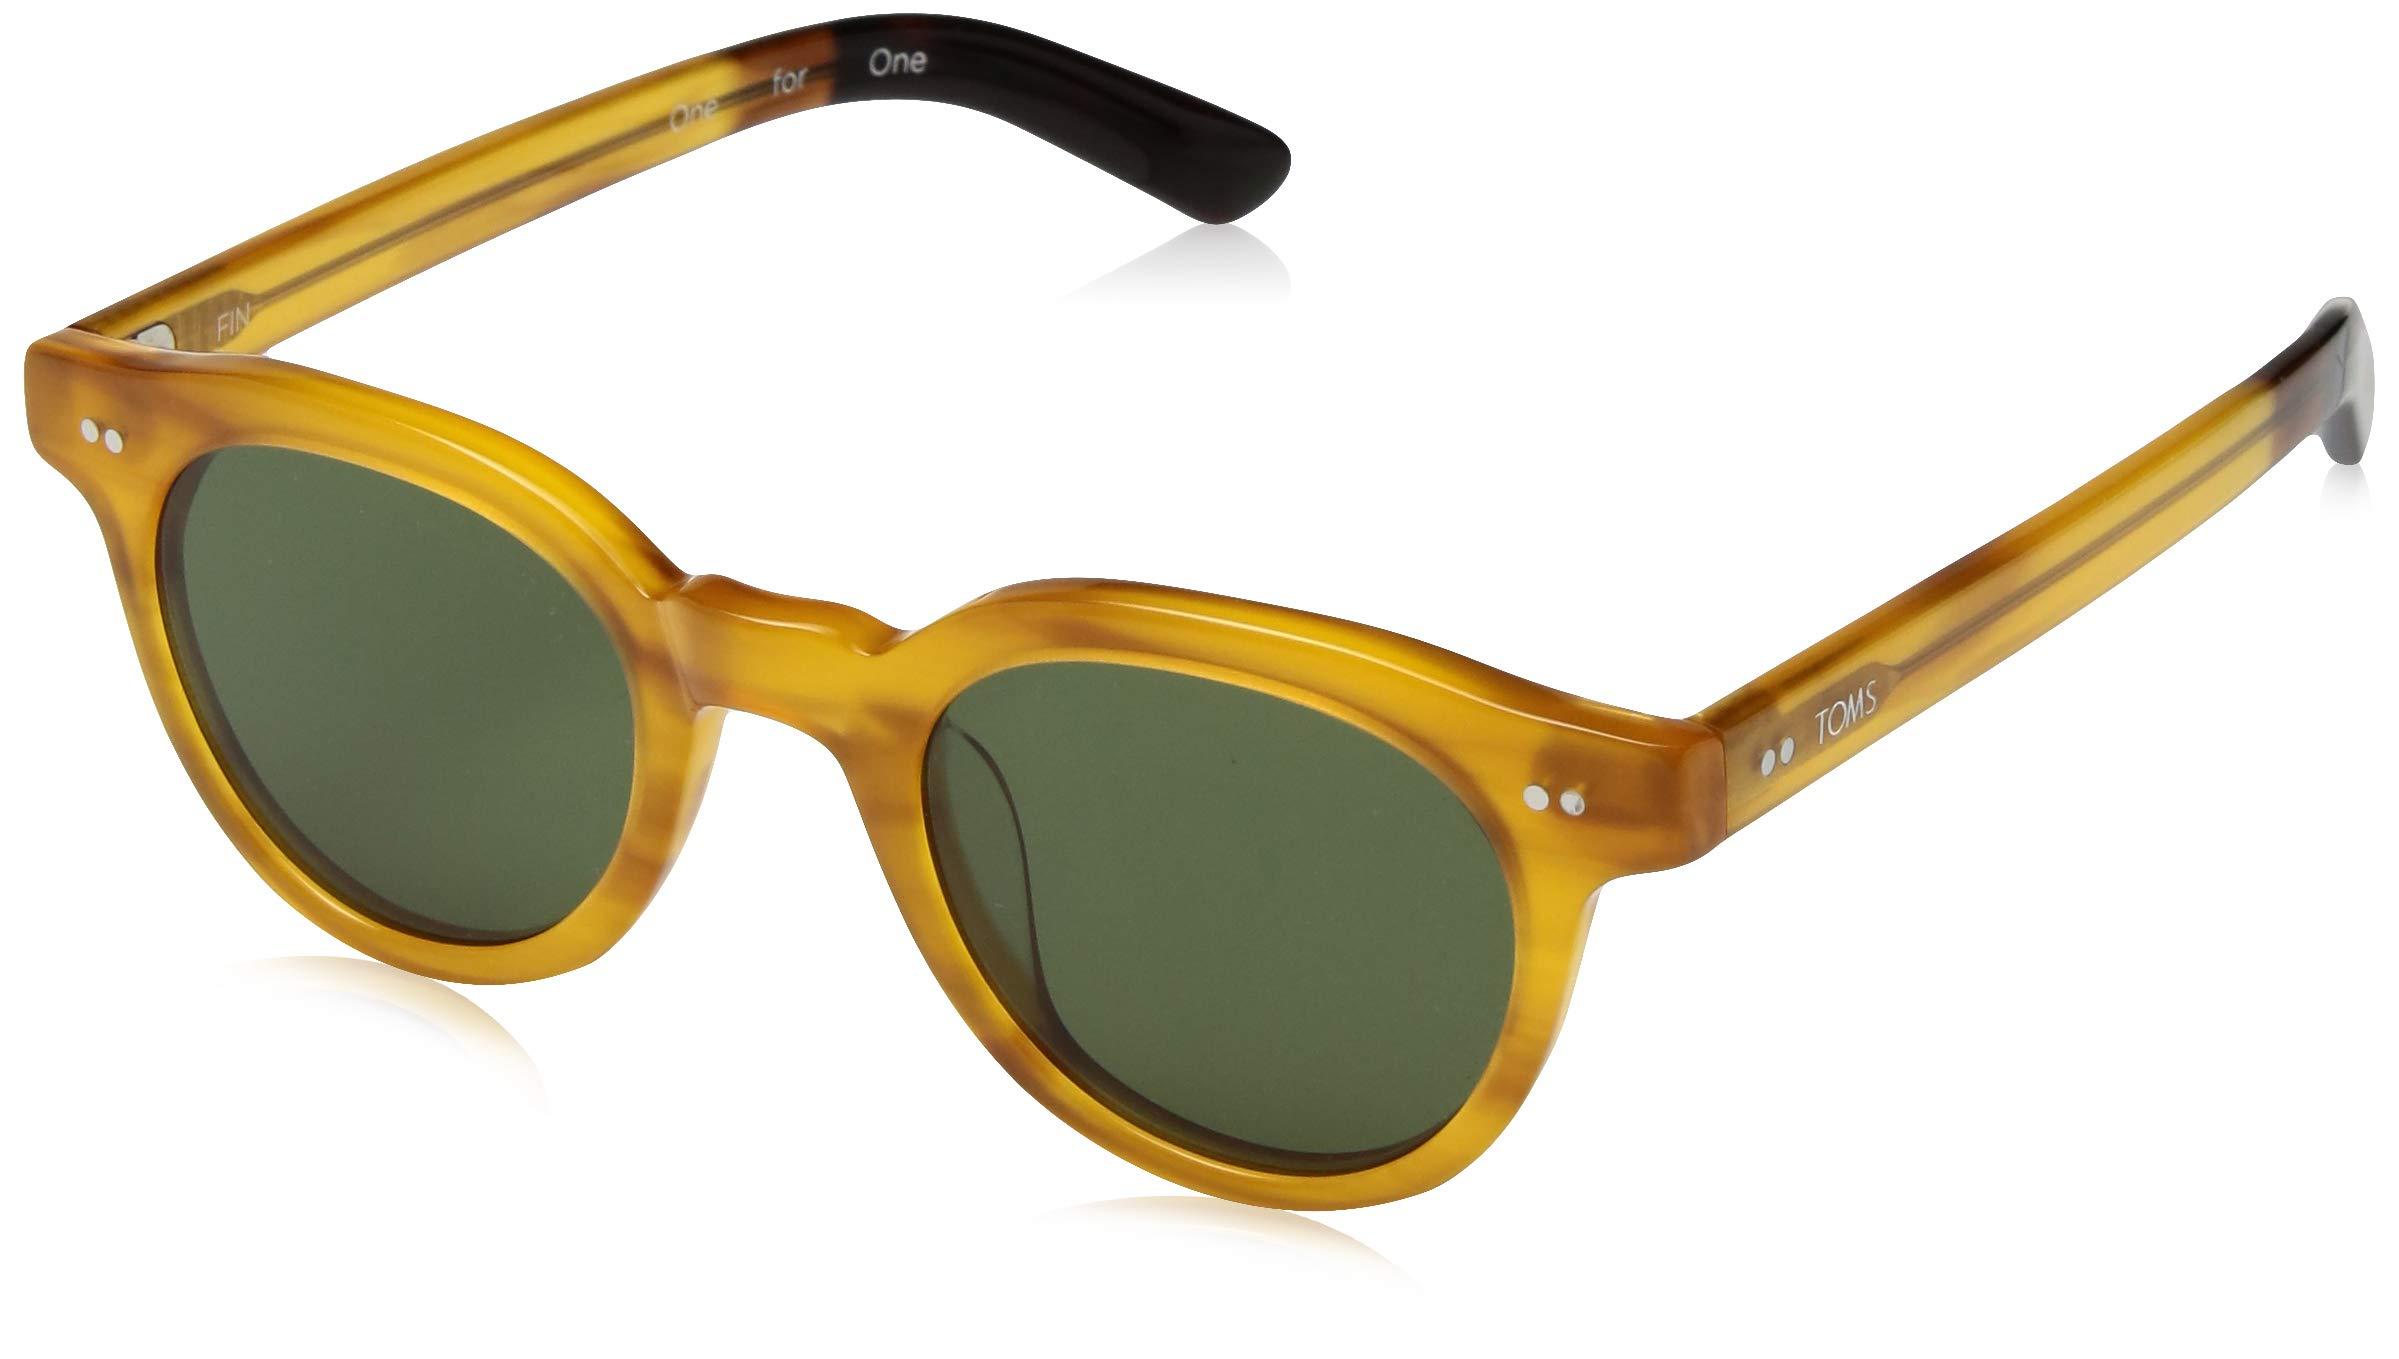 TOMS Adult Fin Sunglasses in Butterscotch (Yellow) - Lyst